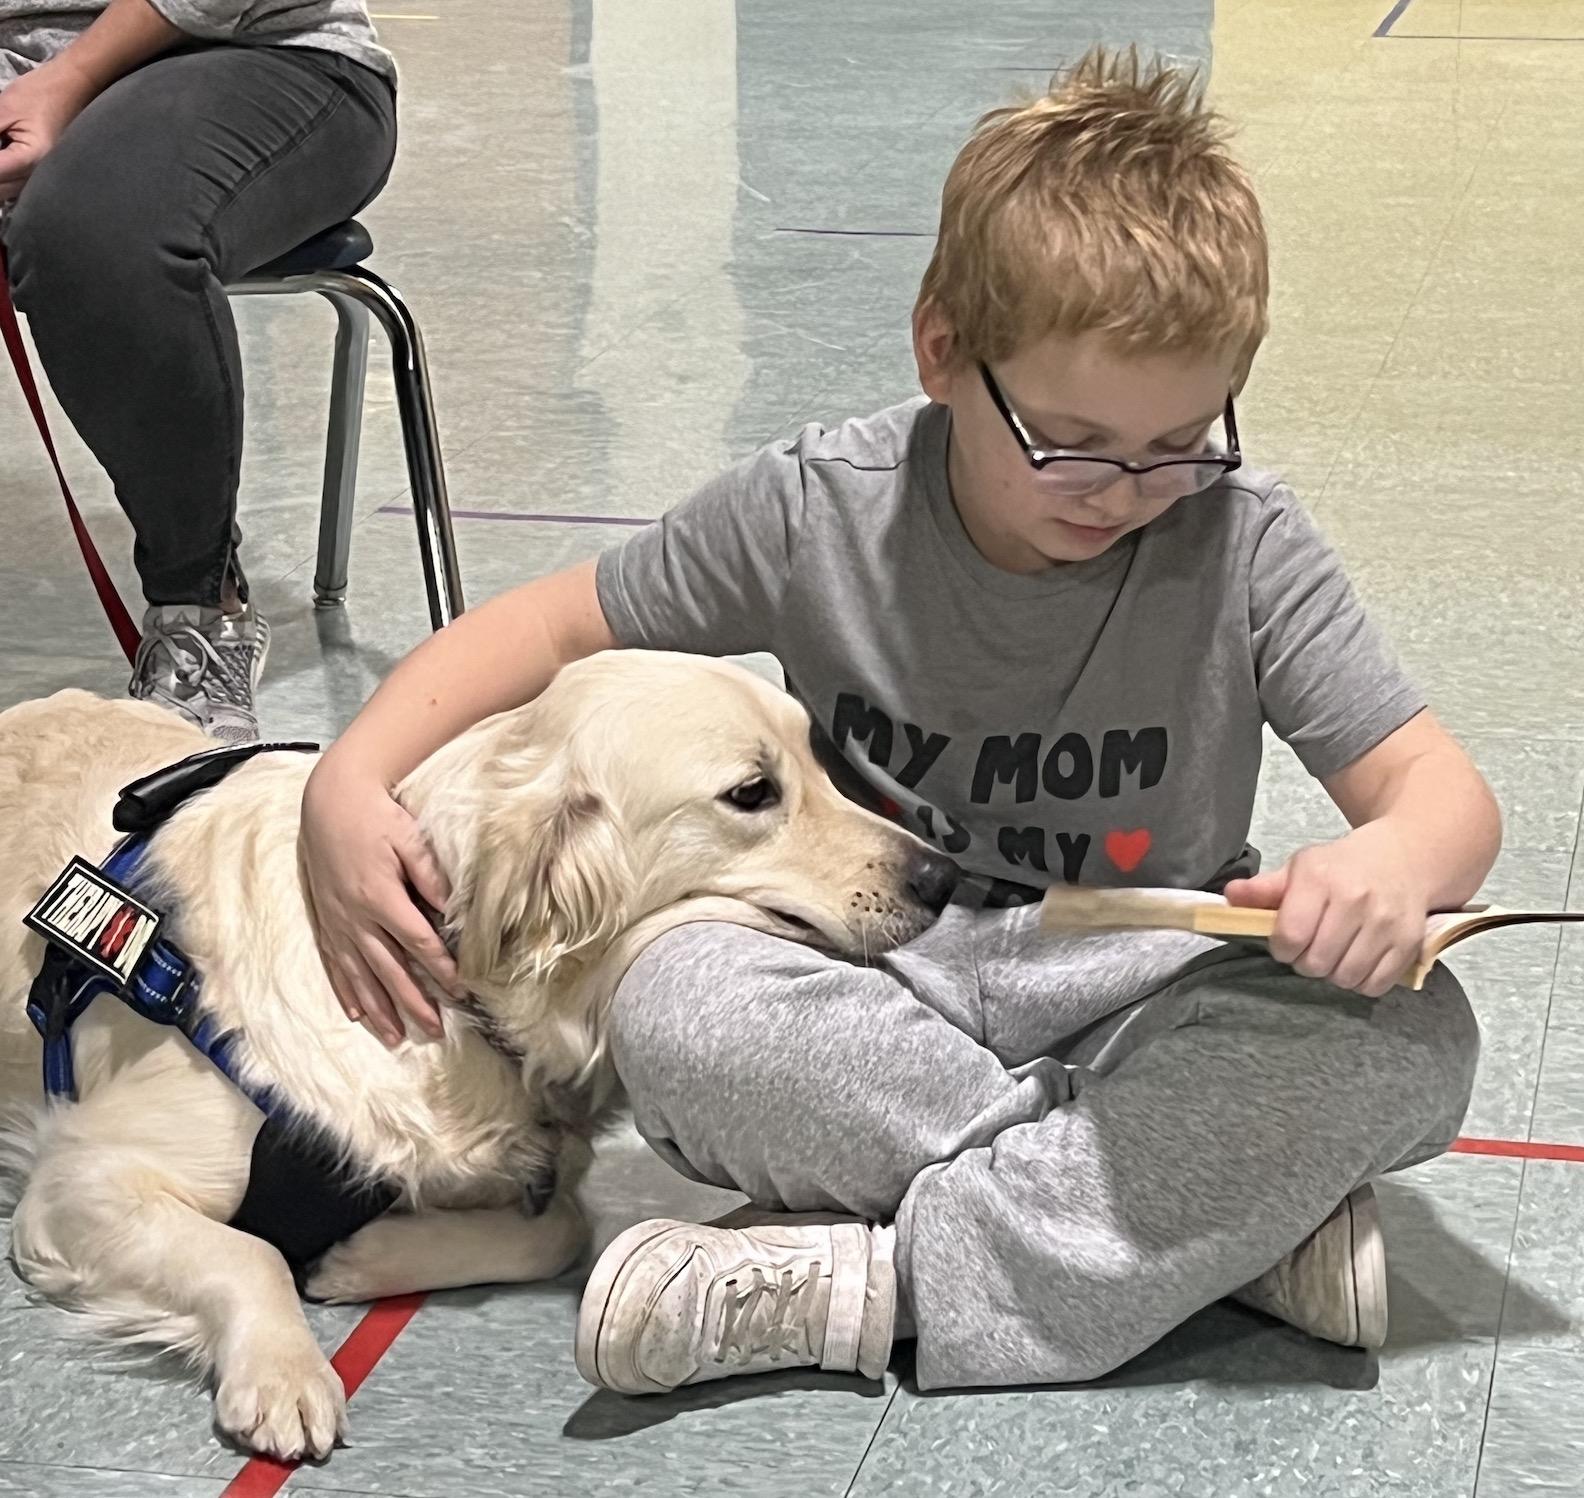 4th-grader James Hudson enjoyed reading to his new friend